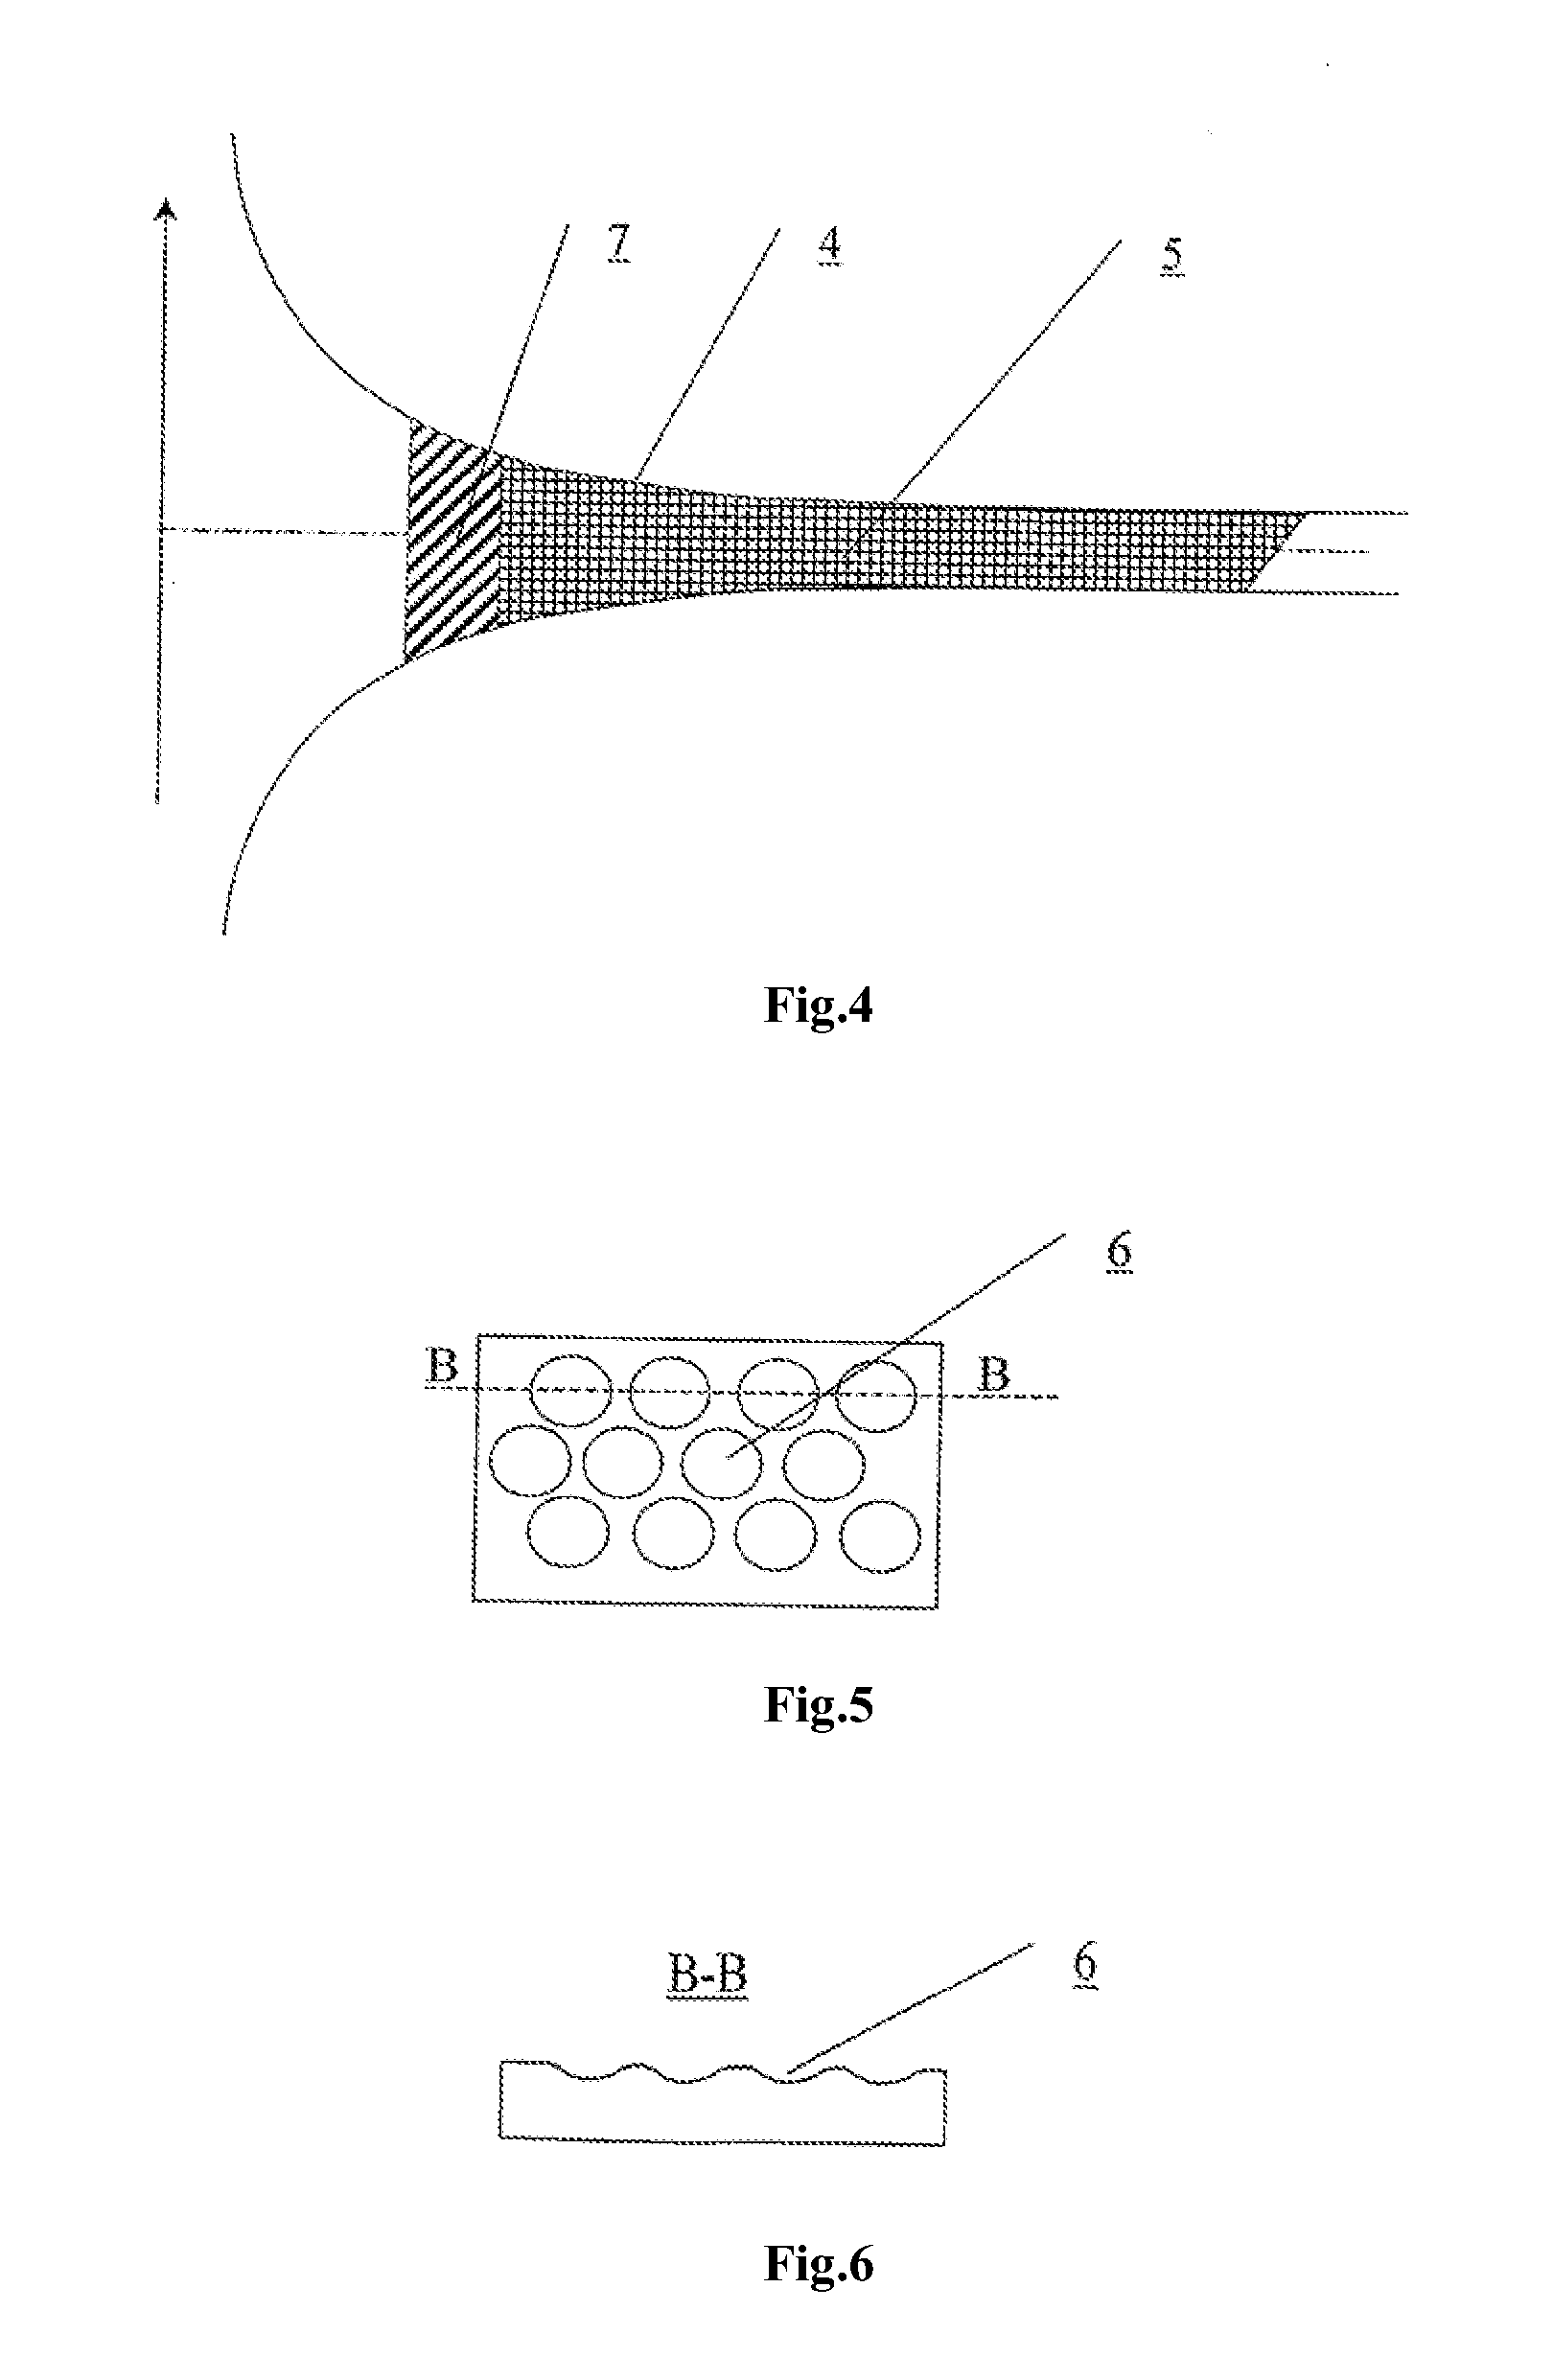 Method for forming a blood flow in surgically reconstituted segments of the blood circulatory system and devices for carrying out said method